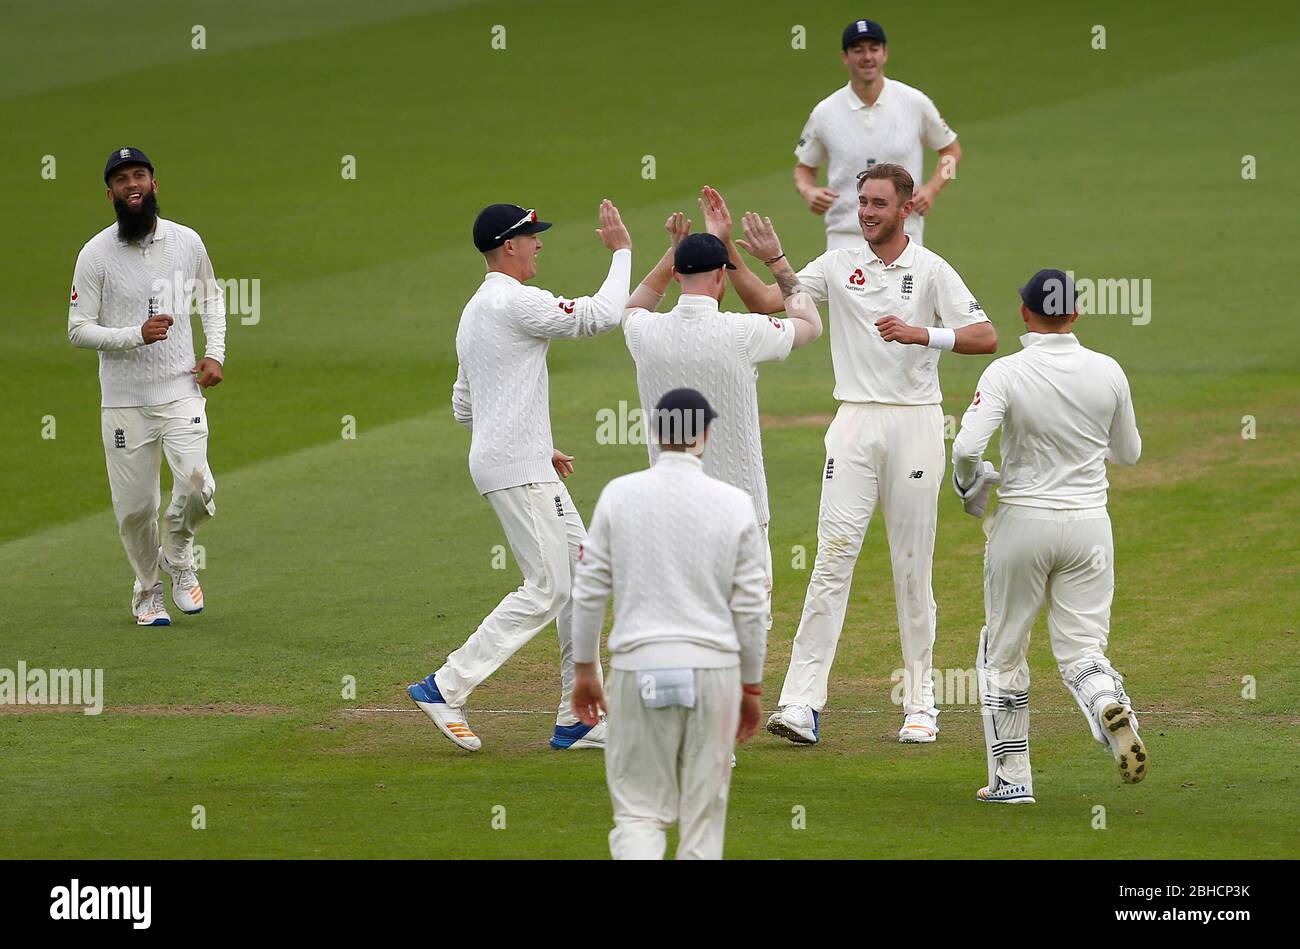 Stuart Broad of England celebrates taking the wicket of Kagiso Rabada of South Africa during day two of the third Investec Test match between England and South Africa at The Oval in London. 28 Jul 2017 Stock Photo